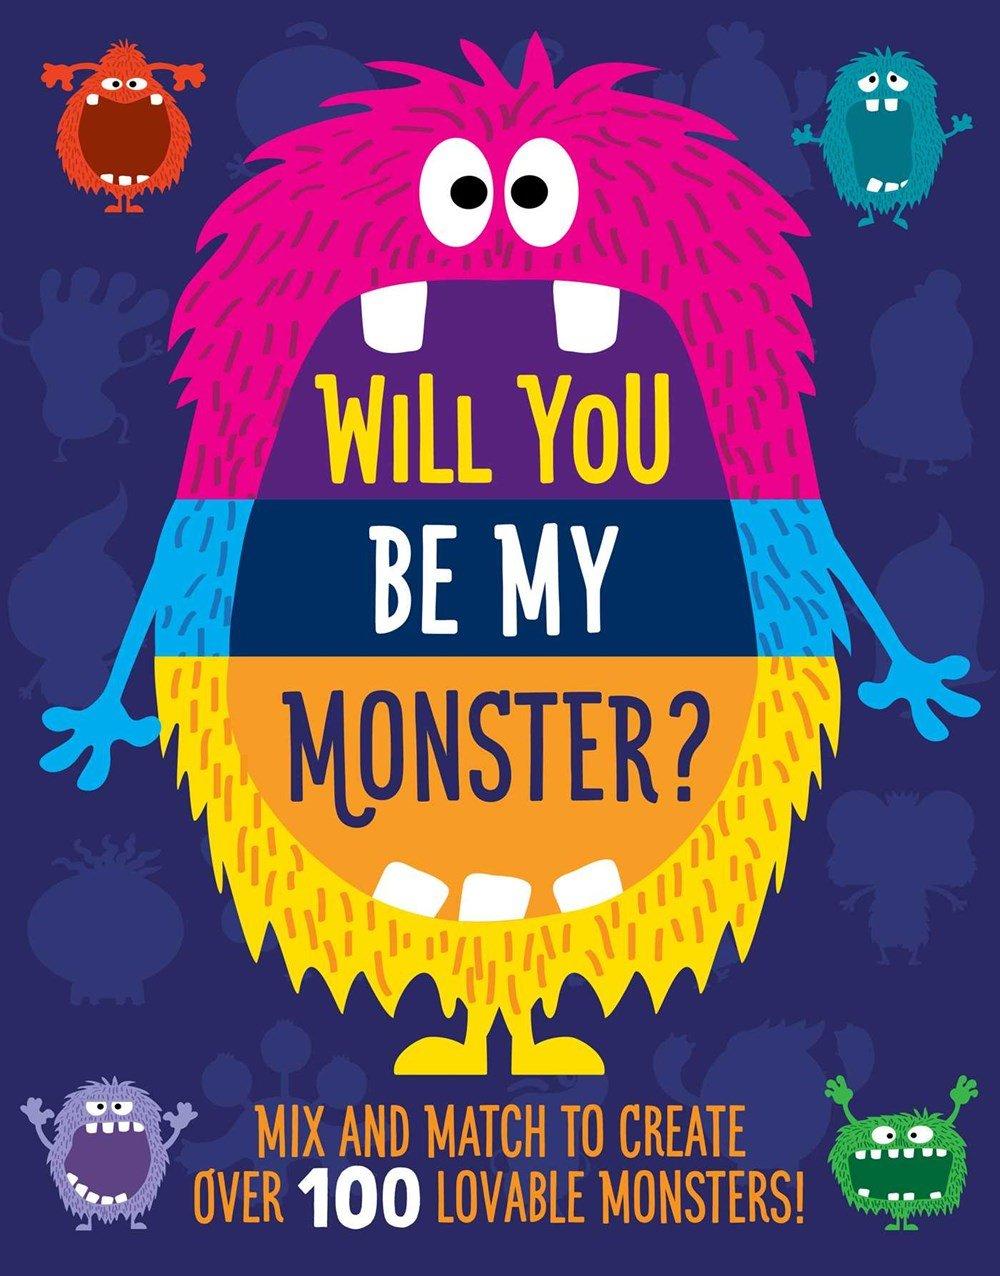 Will You Be My Monster?